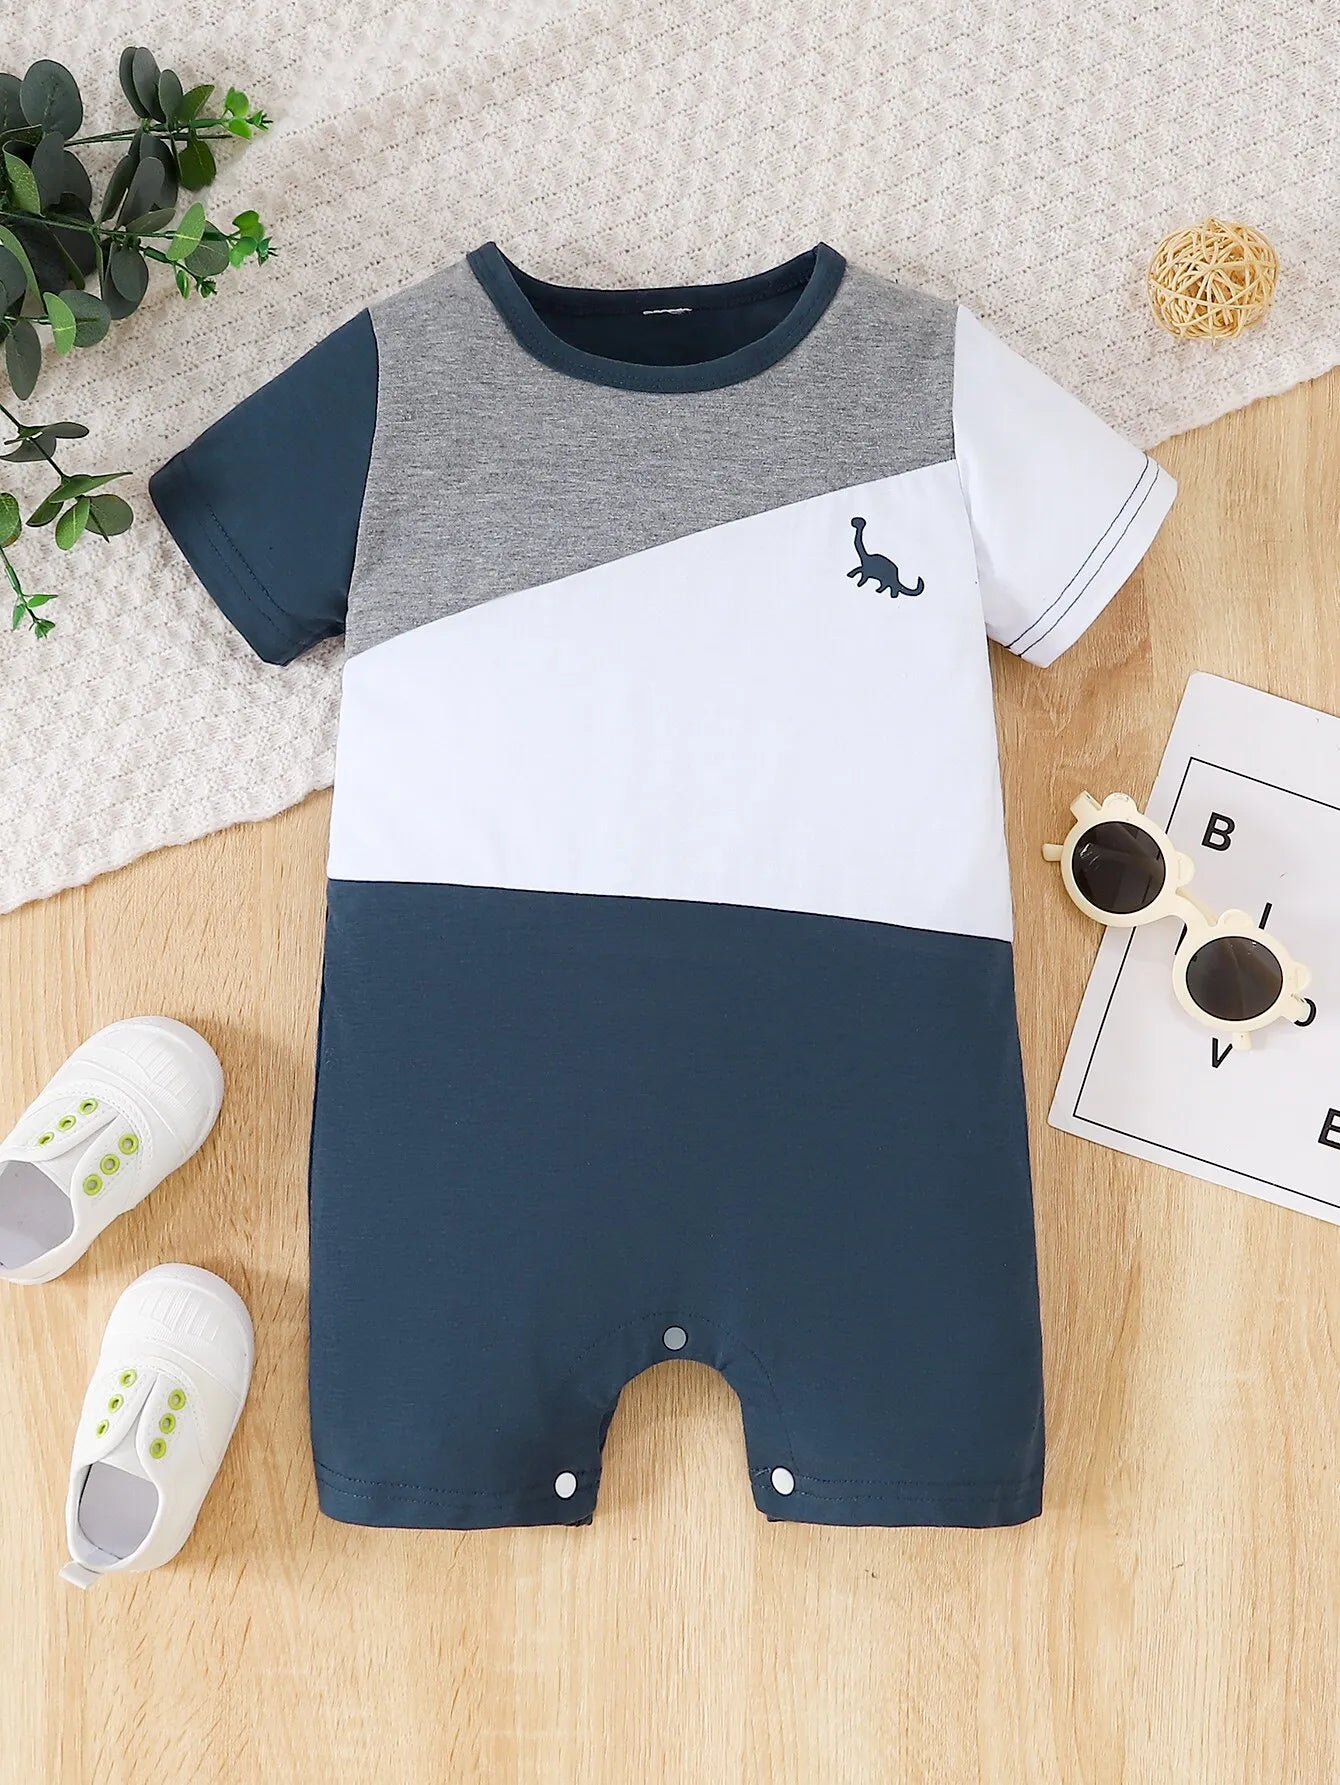 Summer Short Sleeves Cool and Comfortable Holiday Jumpsuit, Suitable for Boys 1-2 Years Old Jumpsuit Shorts, Baby Color Patchwor